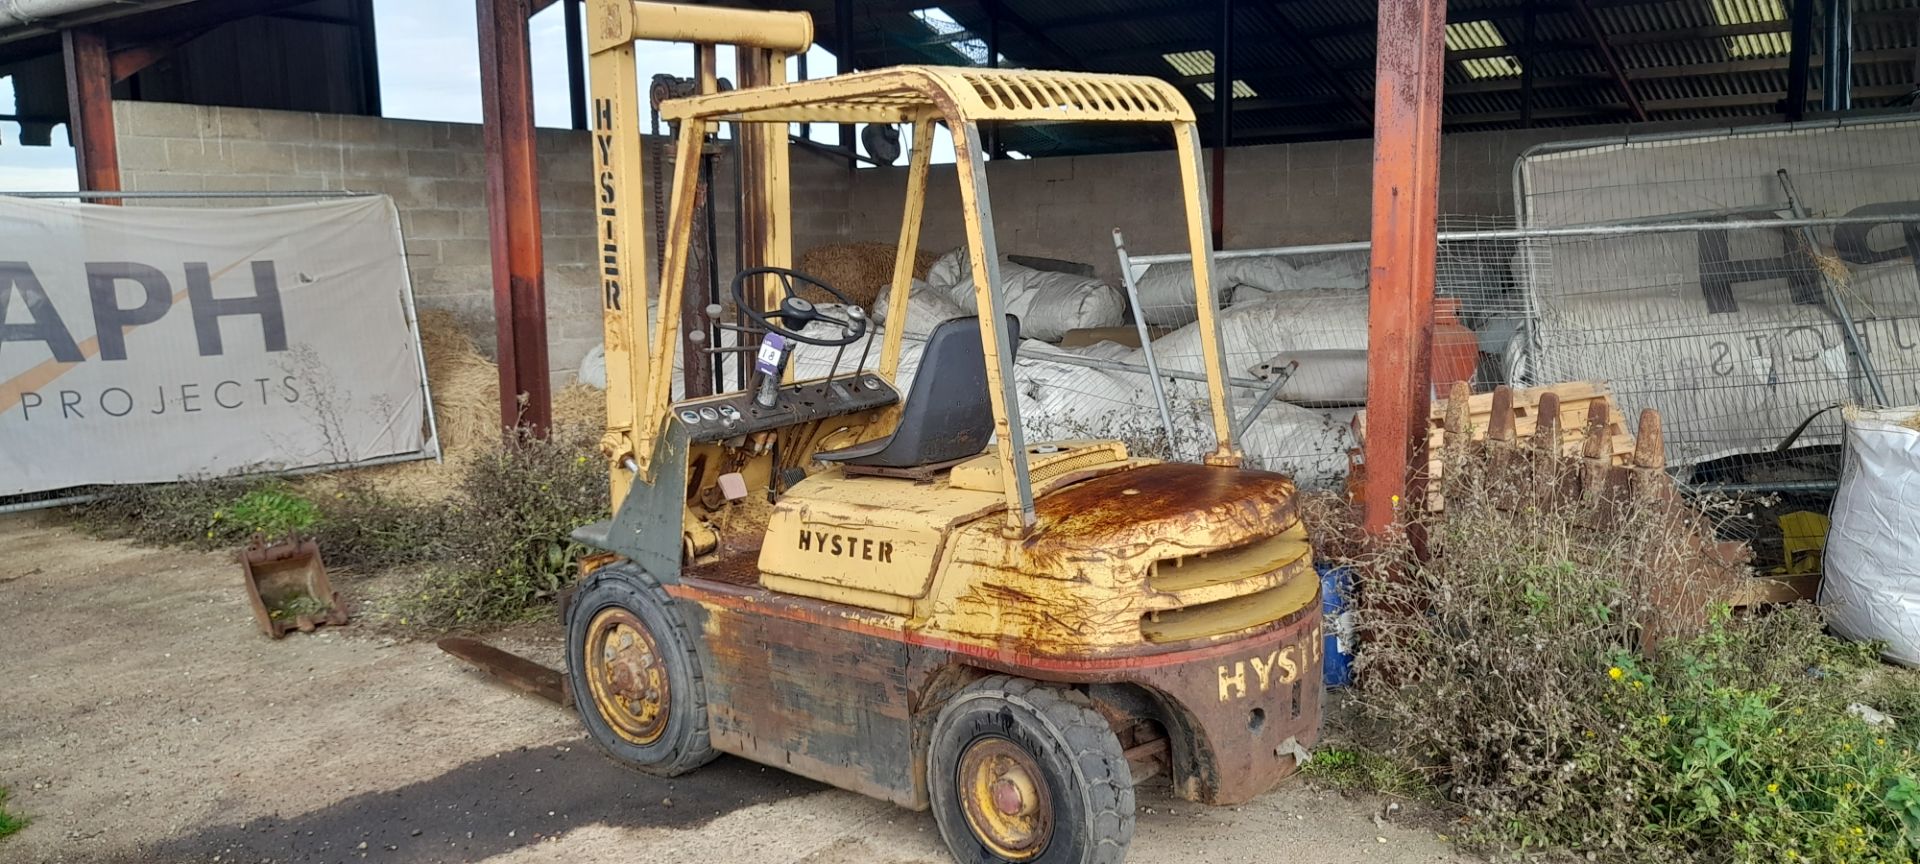 Hyster approx.. 5 tonne Diesel Forklift, Hours 2851 – Spares or Repair - Image 3 of 4